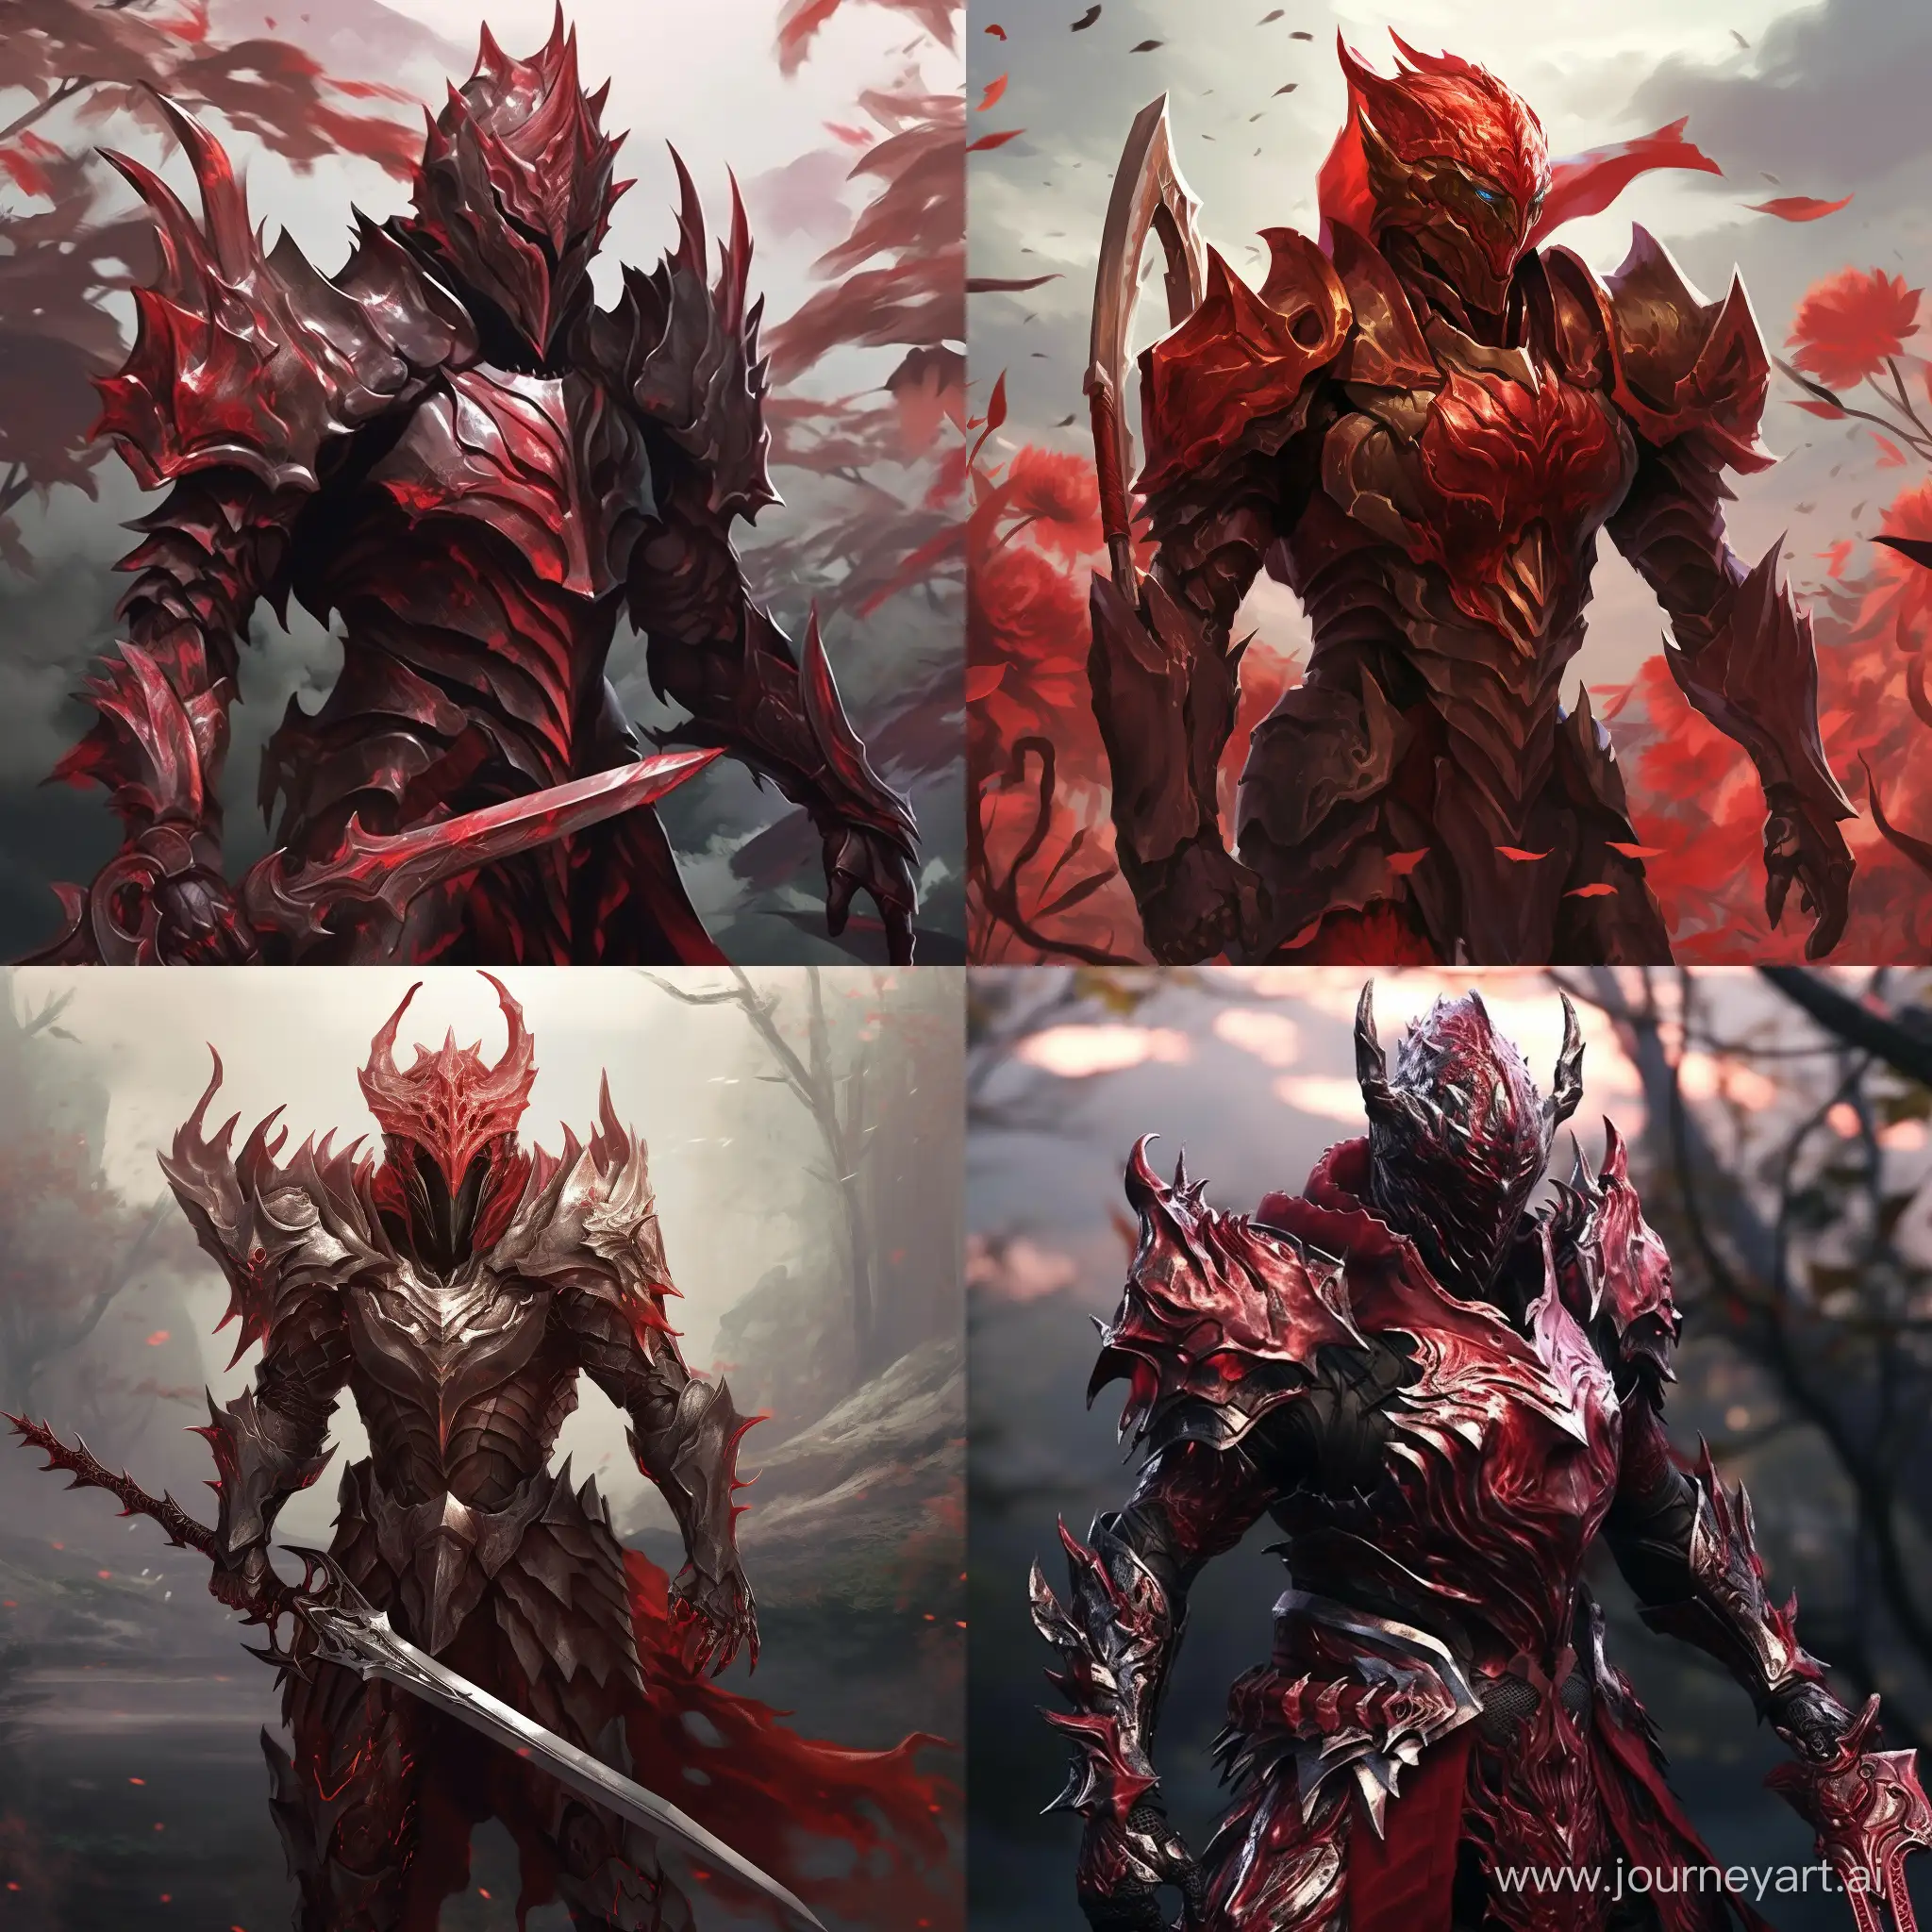 Medieval fantasy armor, full-plate armor, construct, no human features, a living armor, red color, crimson armor, red dragon scale armor, holding enchanted dark spear, flower field background, helmet in the shape of a normal helmet, not draconic design, realistic armor, no exagerated details, no horns, good lightning, clear view, warrior pose, minimalist armor